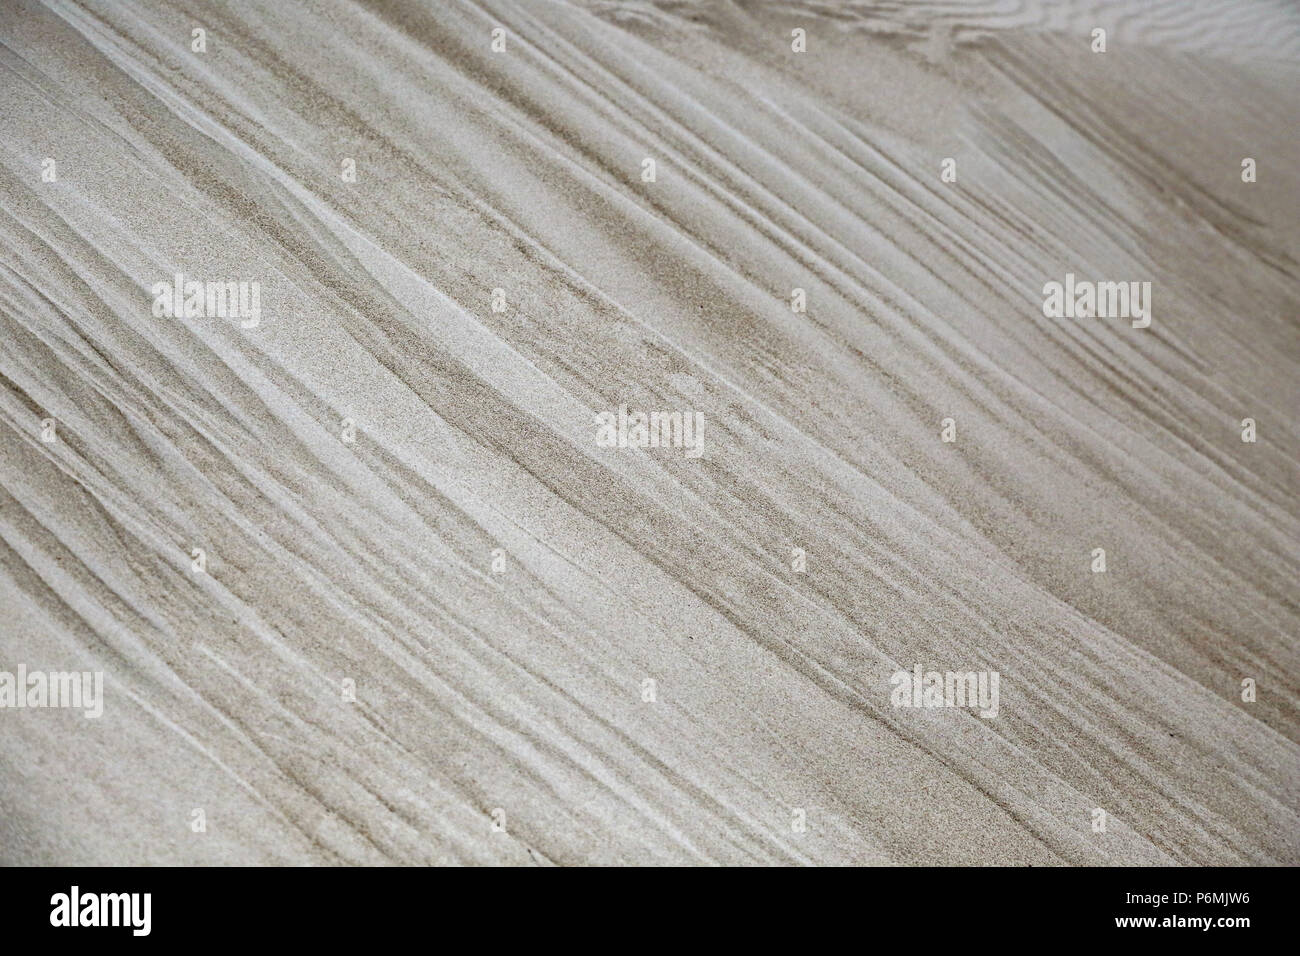 Warnemuende, wave pattern in the sand Stock Photo